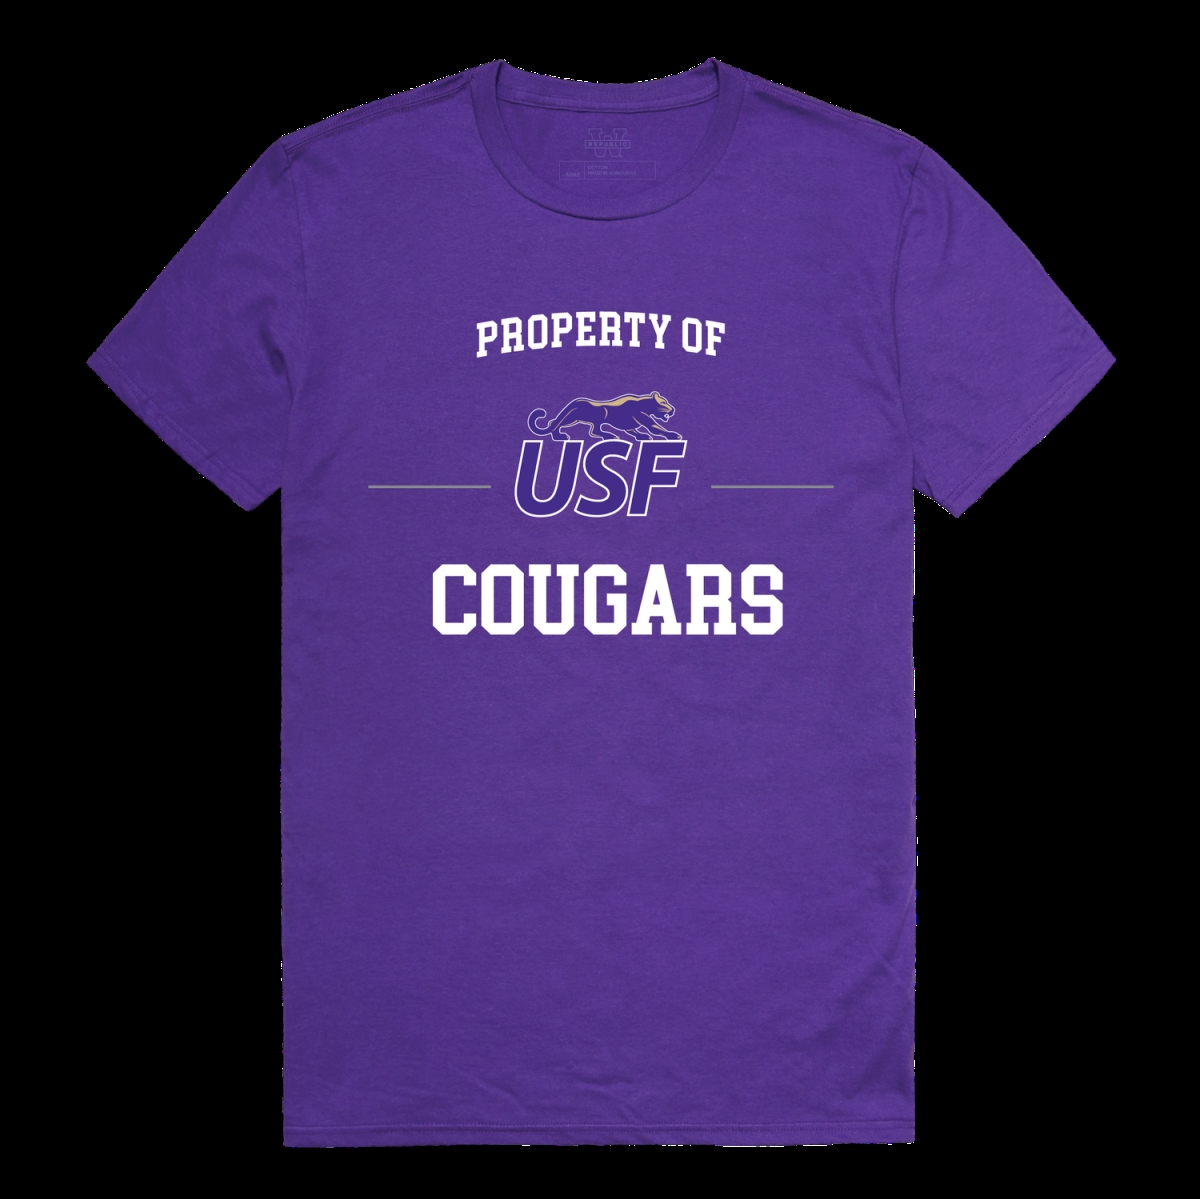 517-380-PUR-05 University of Sioux Falls Cougars Property College T-Shirt, Purple - 2XL -  W Republic